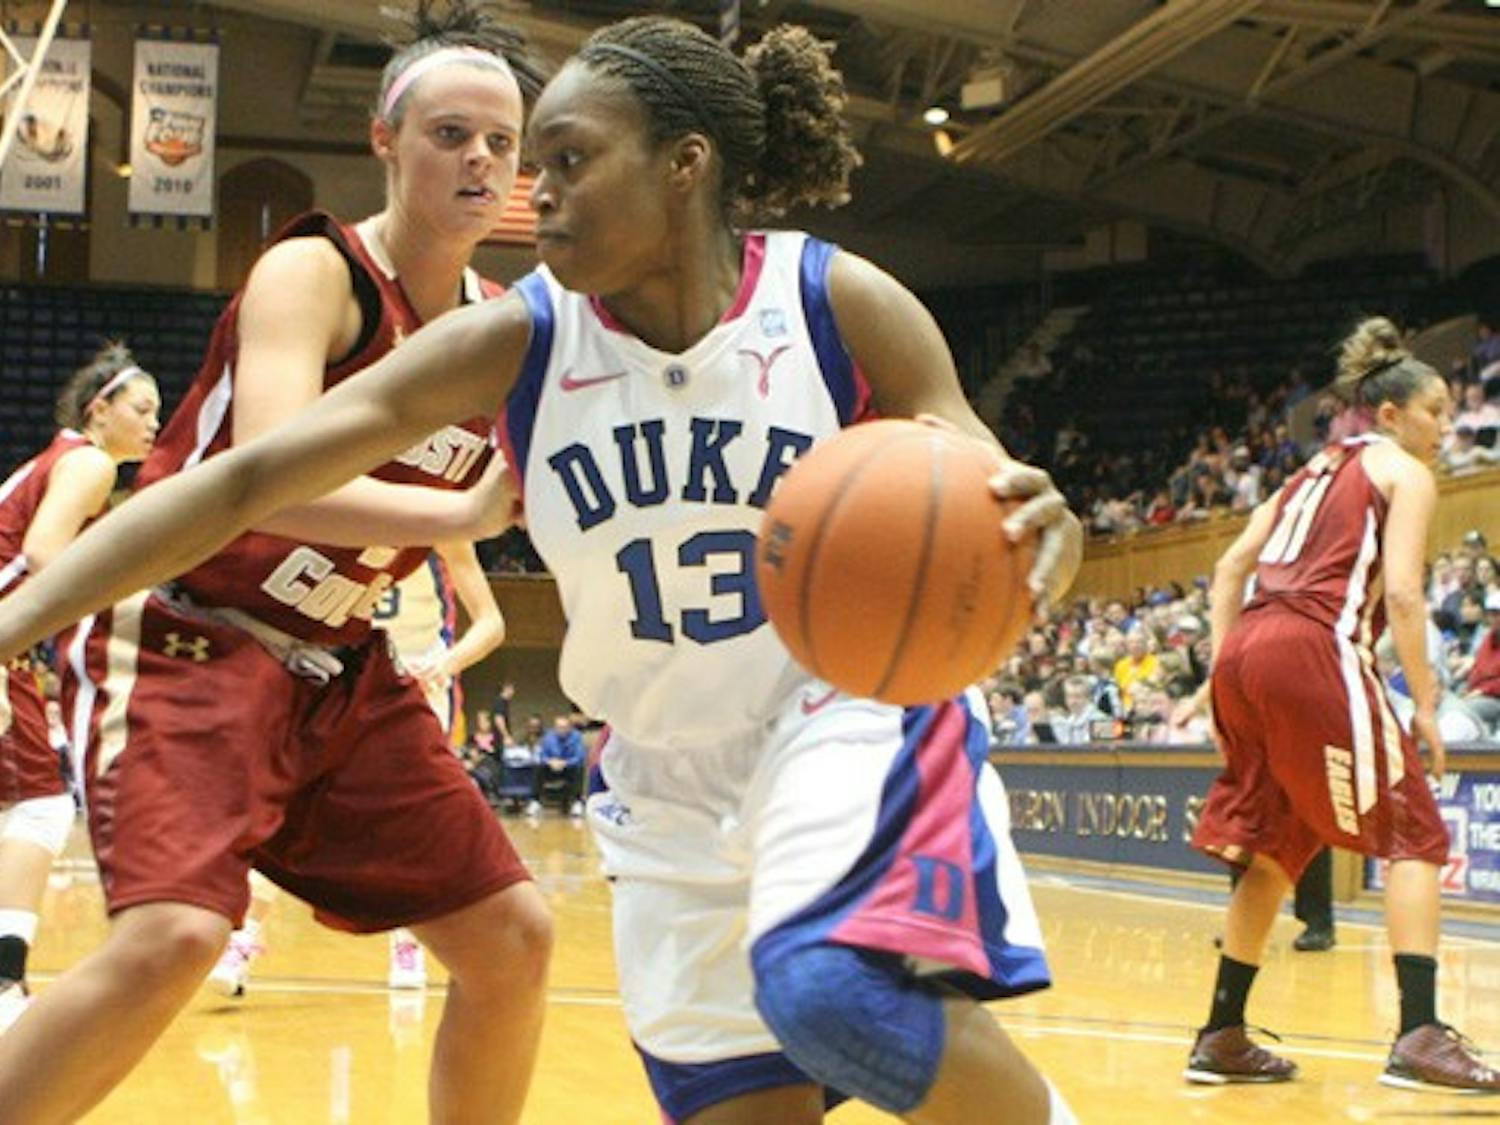 Karima Christmas had 14 points and 11 rebounds to lead the Blue Devils to their second win in three days.